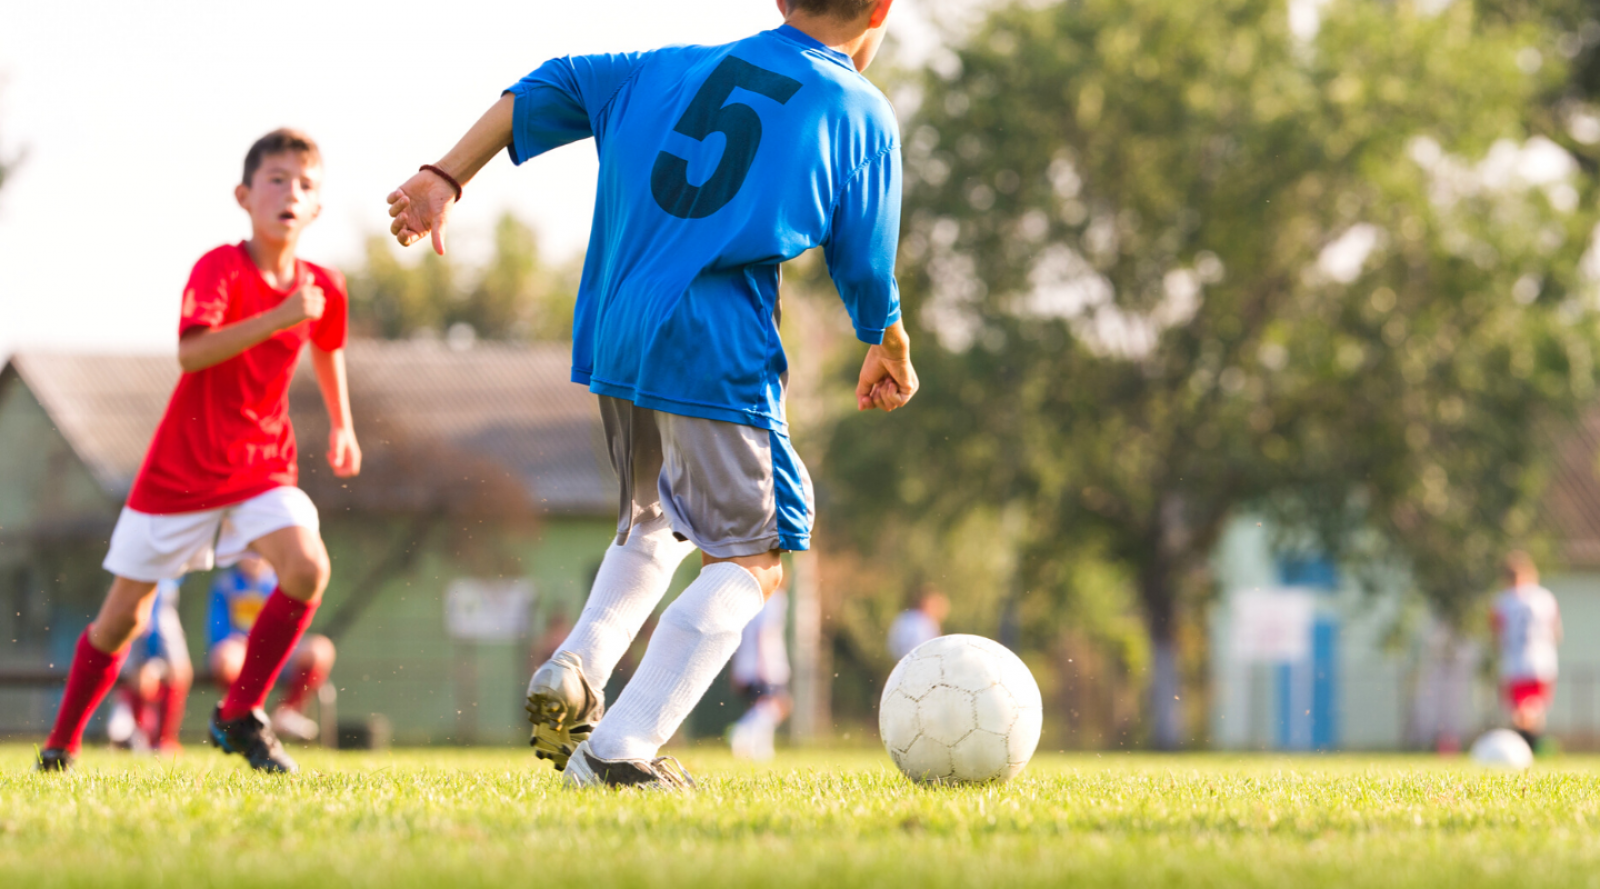 Kids playing soccer on green grass banner image